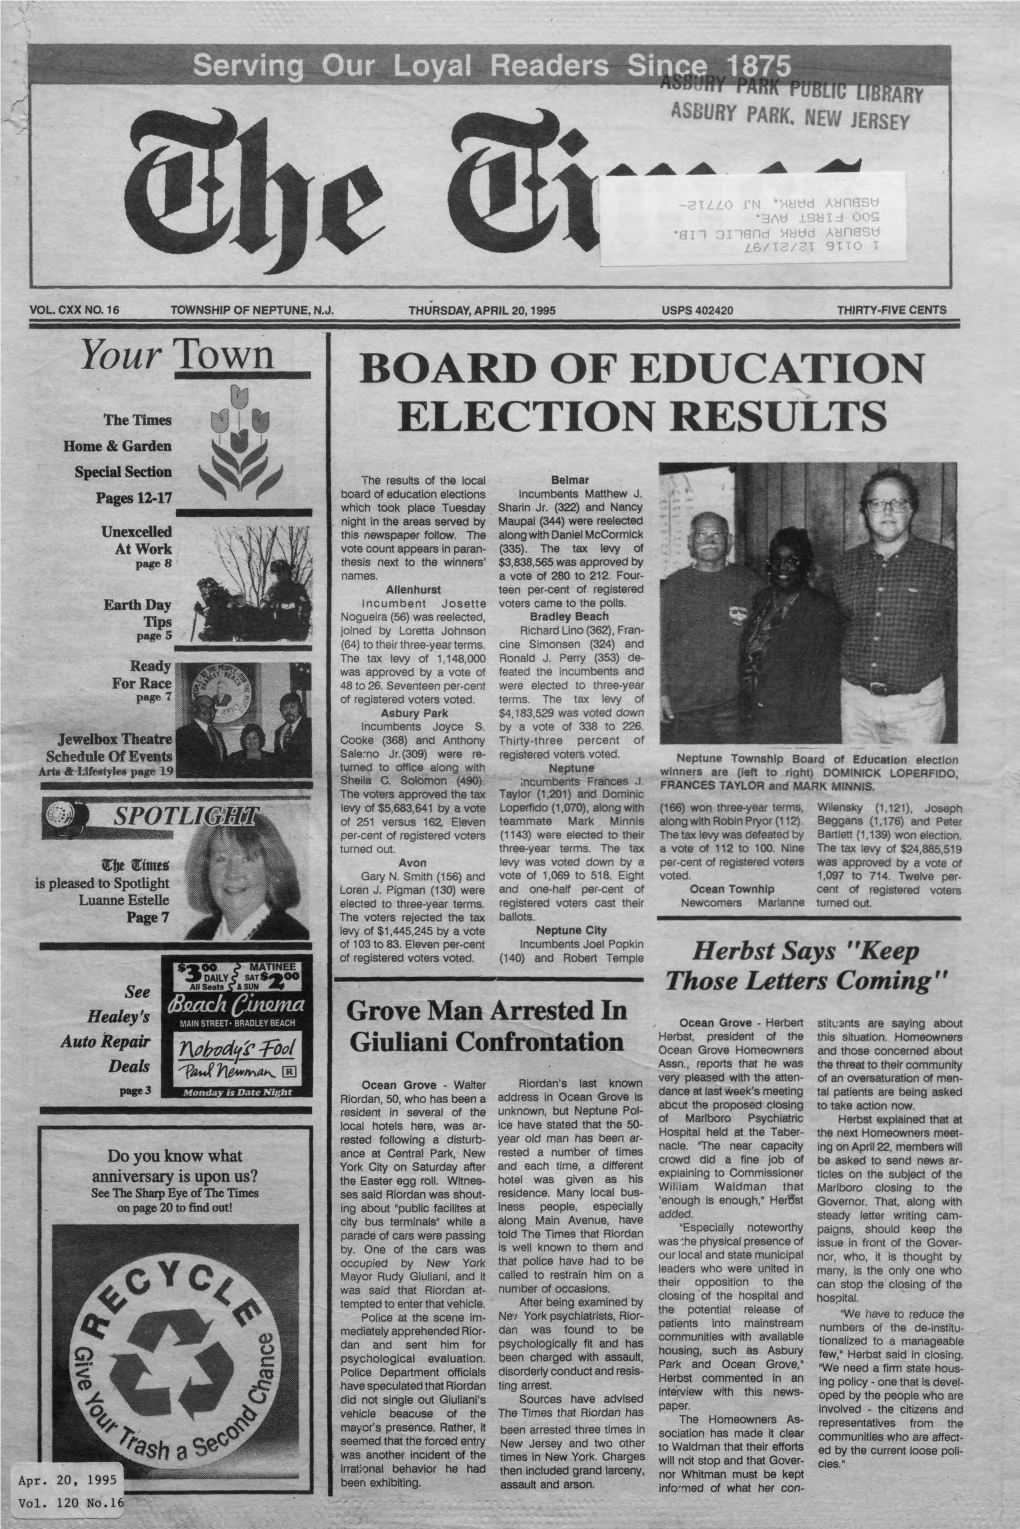 Board of Education Election Results